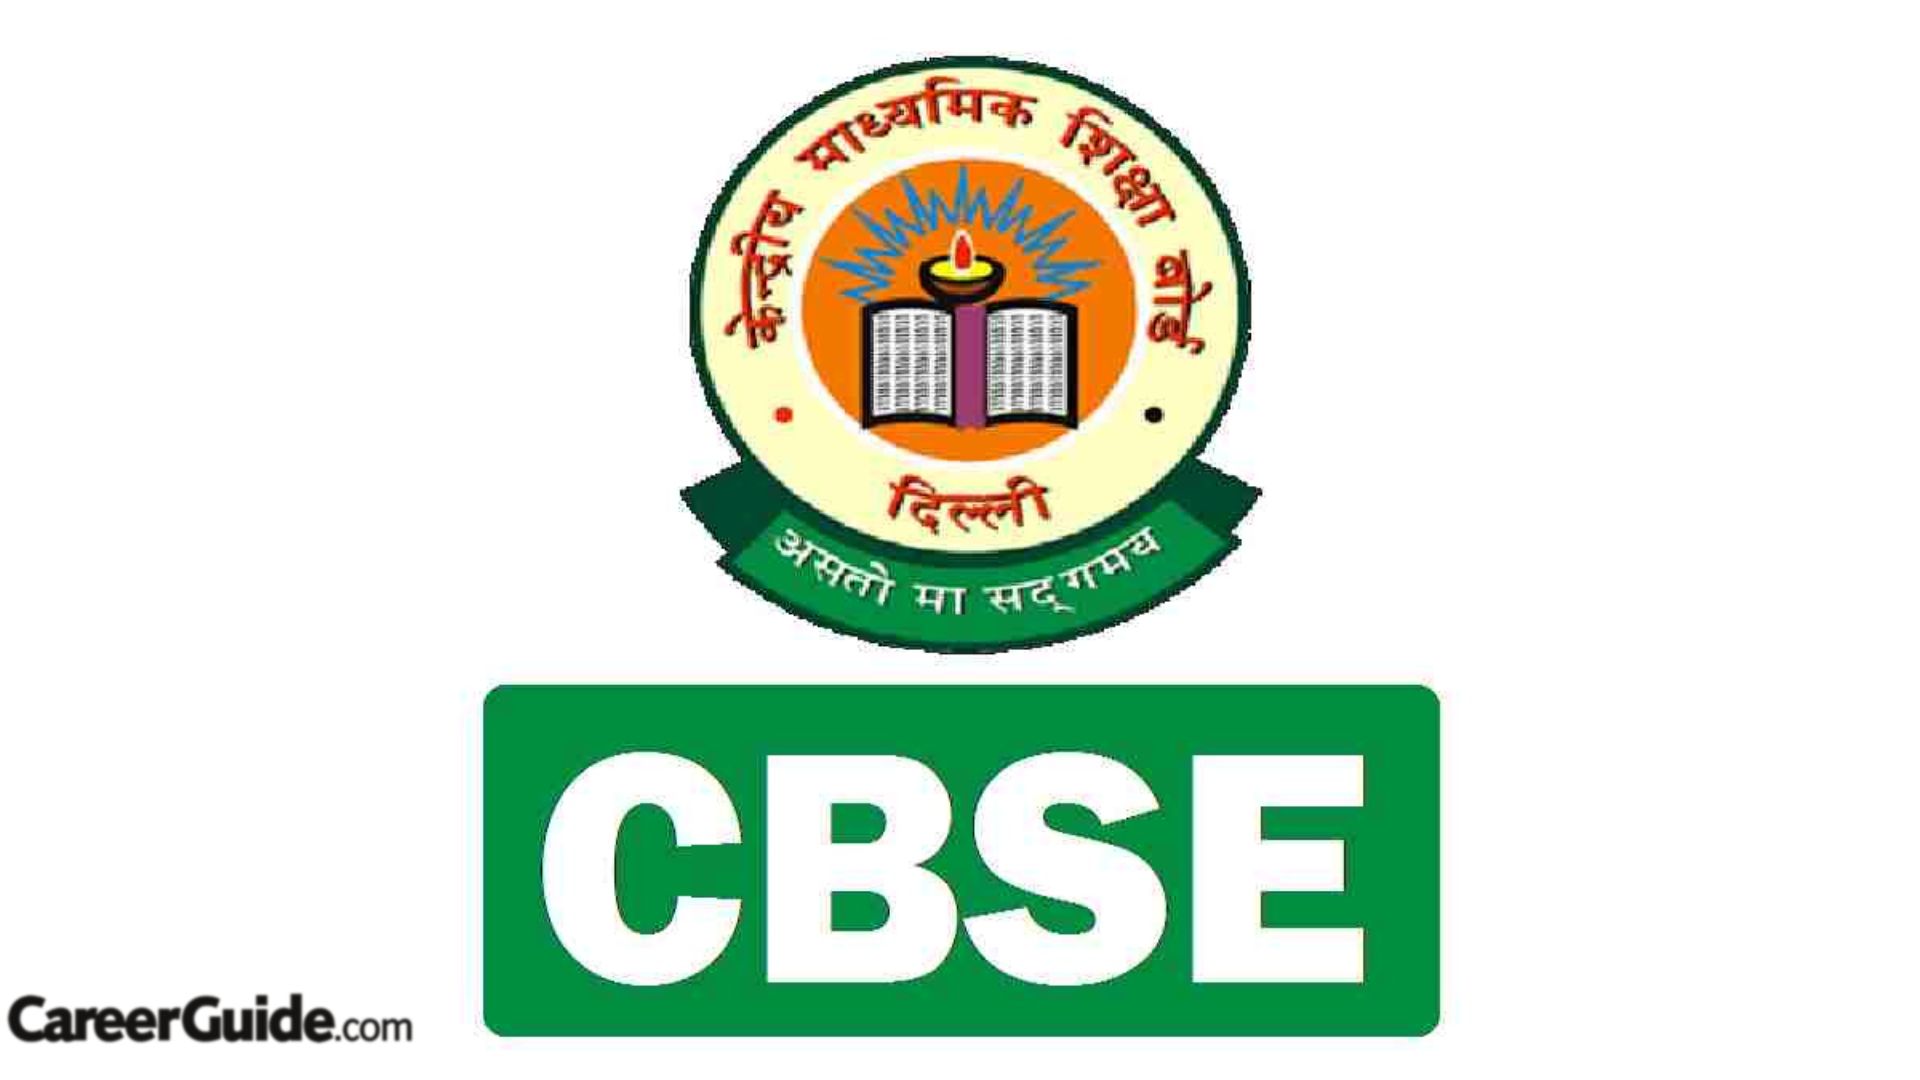 About CBSE board